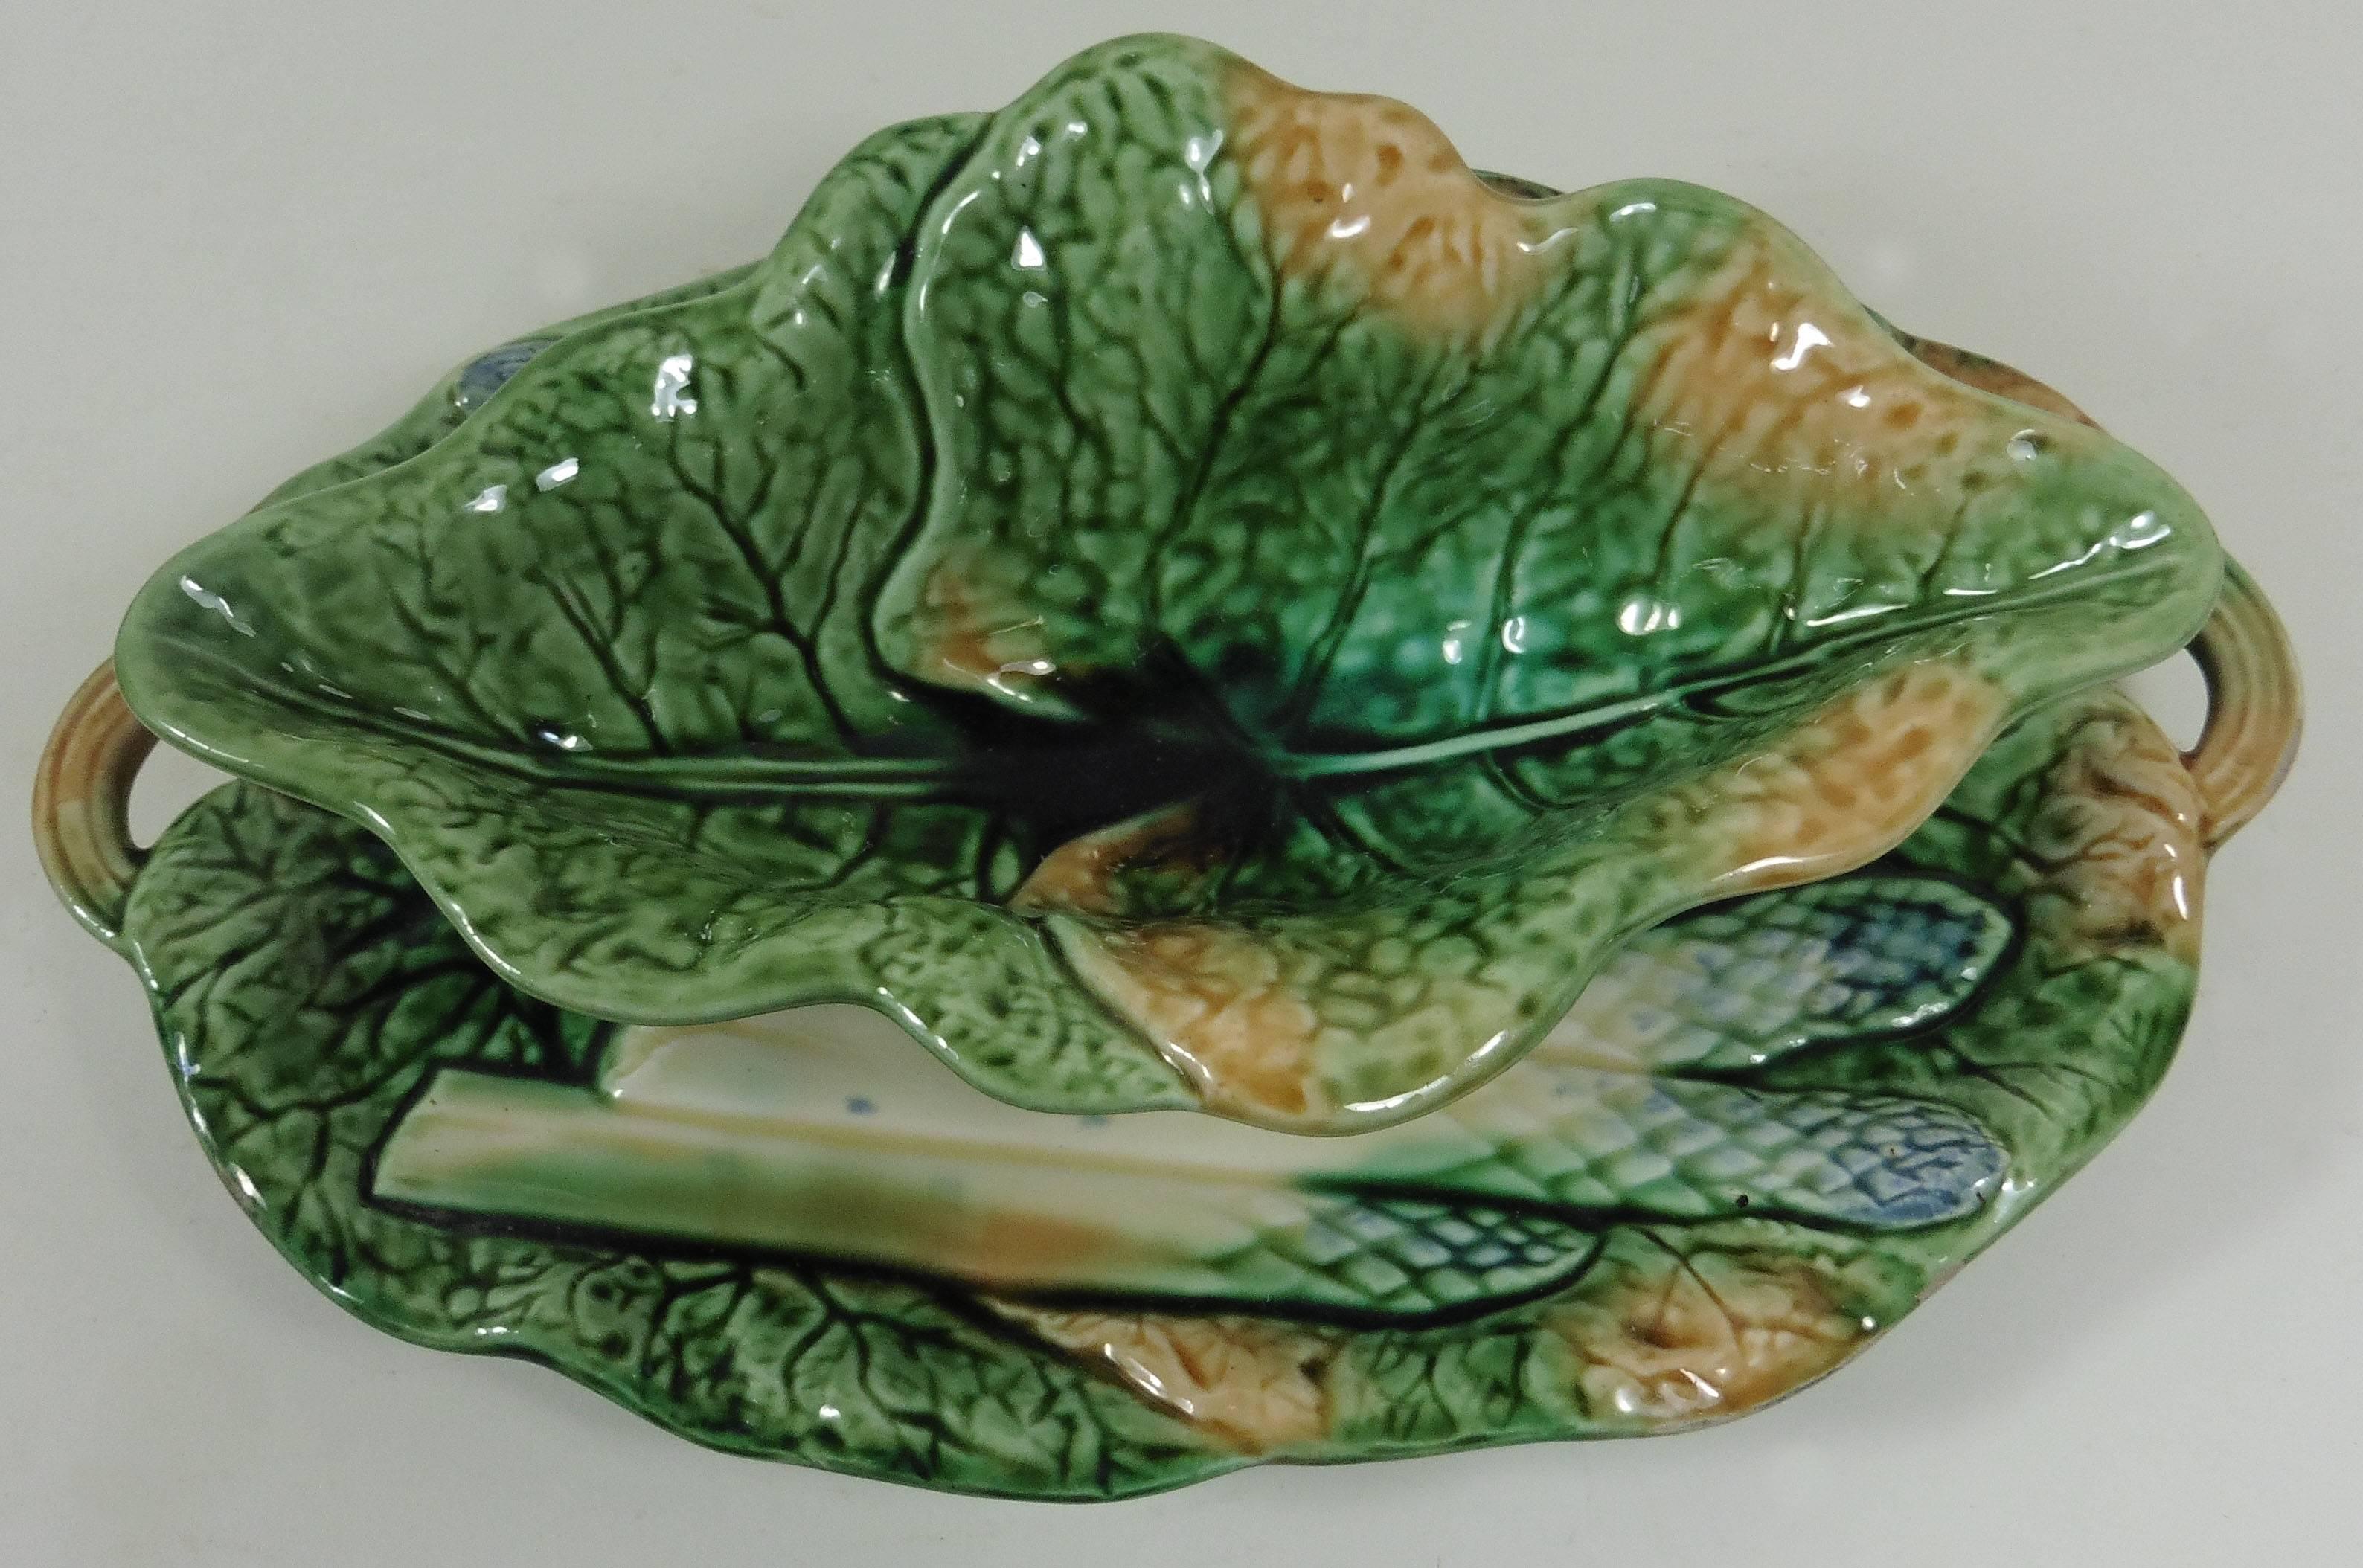 Rare Majolica asparagus sauce boat attributed to Creil et Montereau.
The piece is decorated with cabbage leaves and asparagus.
A set of plates is available in a rare yellow background.
Reference / Page 118 